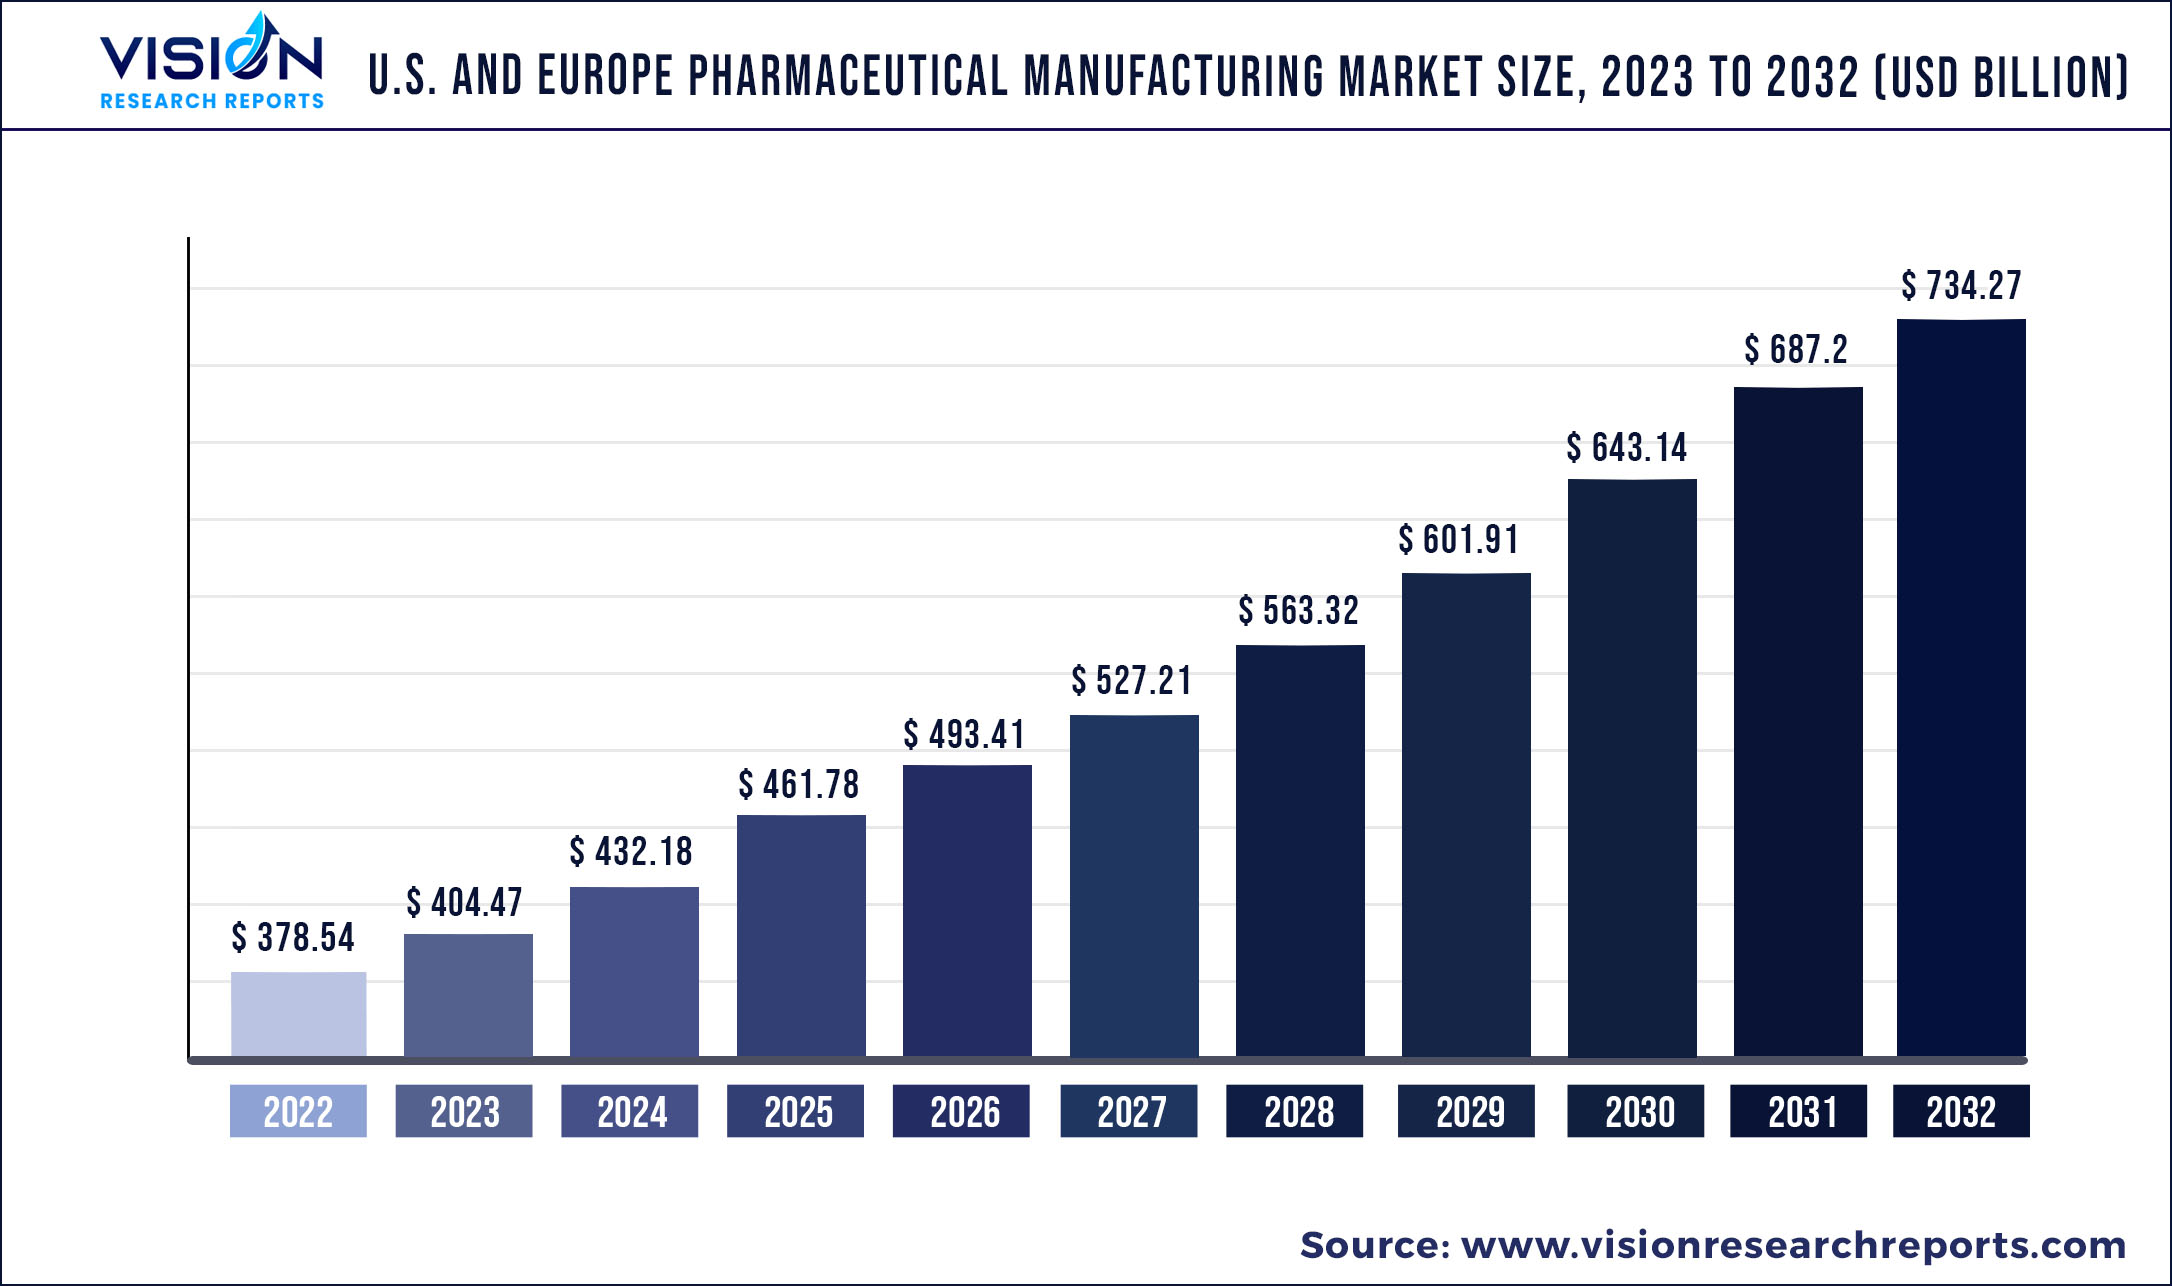 U.S. And Europe Pharmaceutical Manufacturing Market Size 2023 to 2032